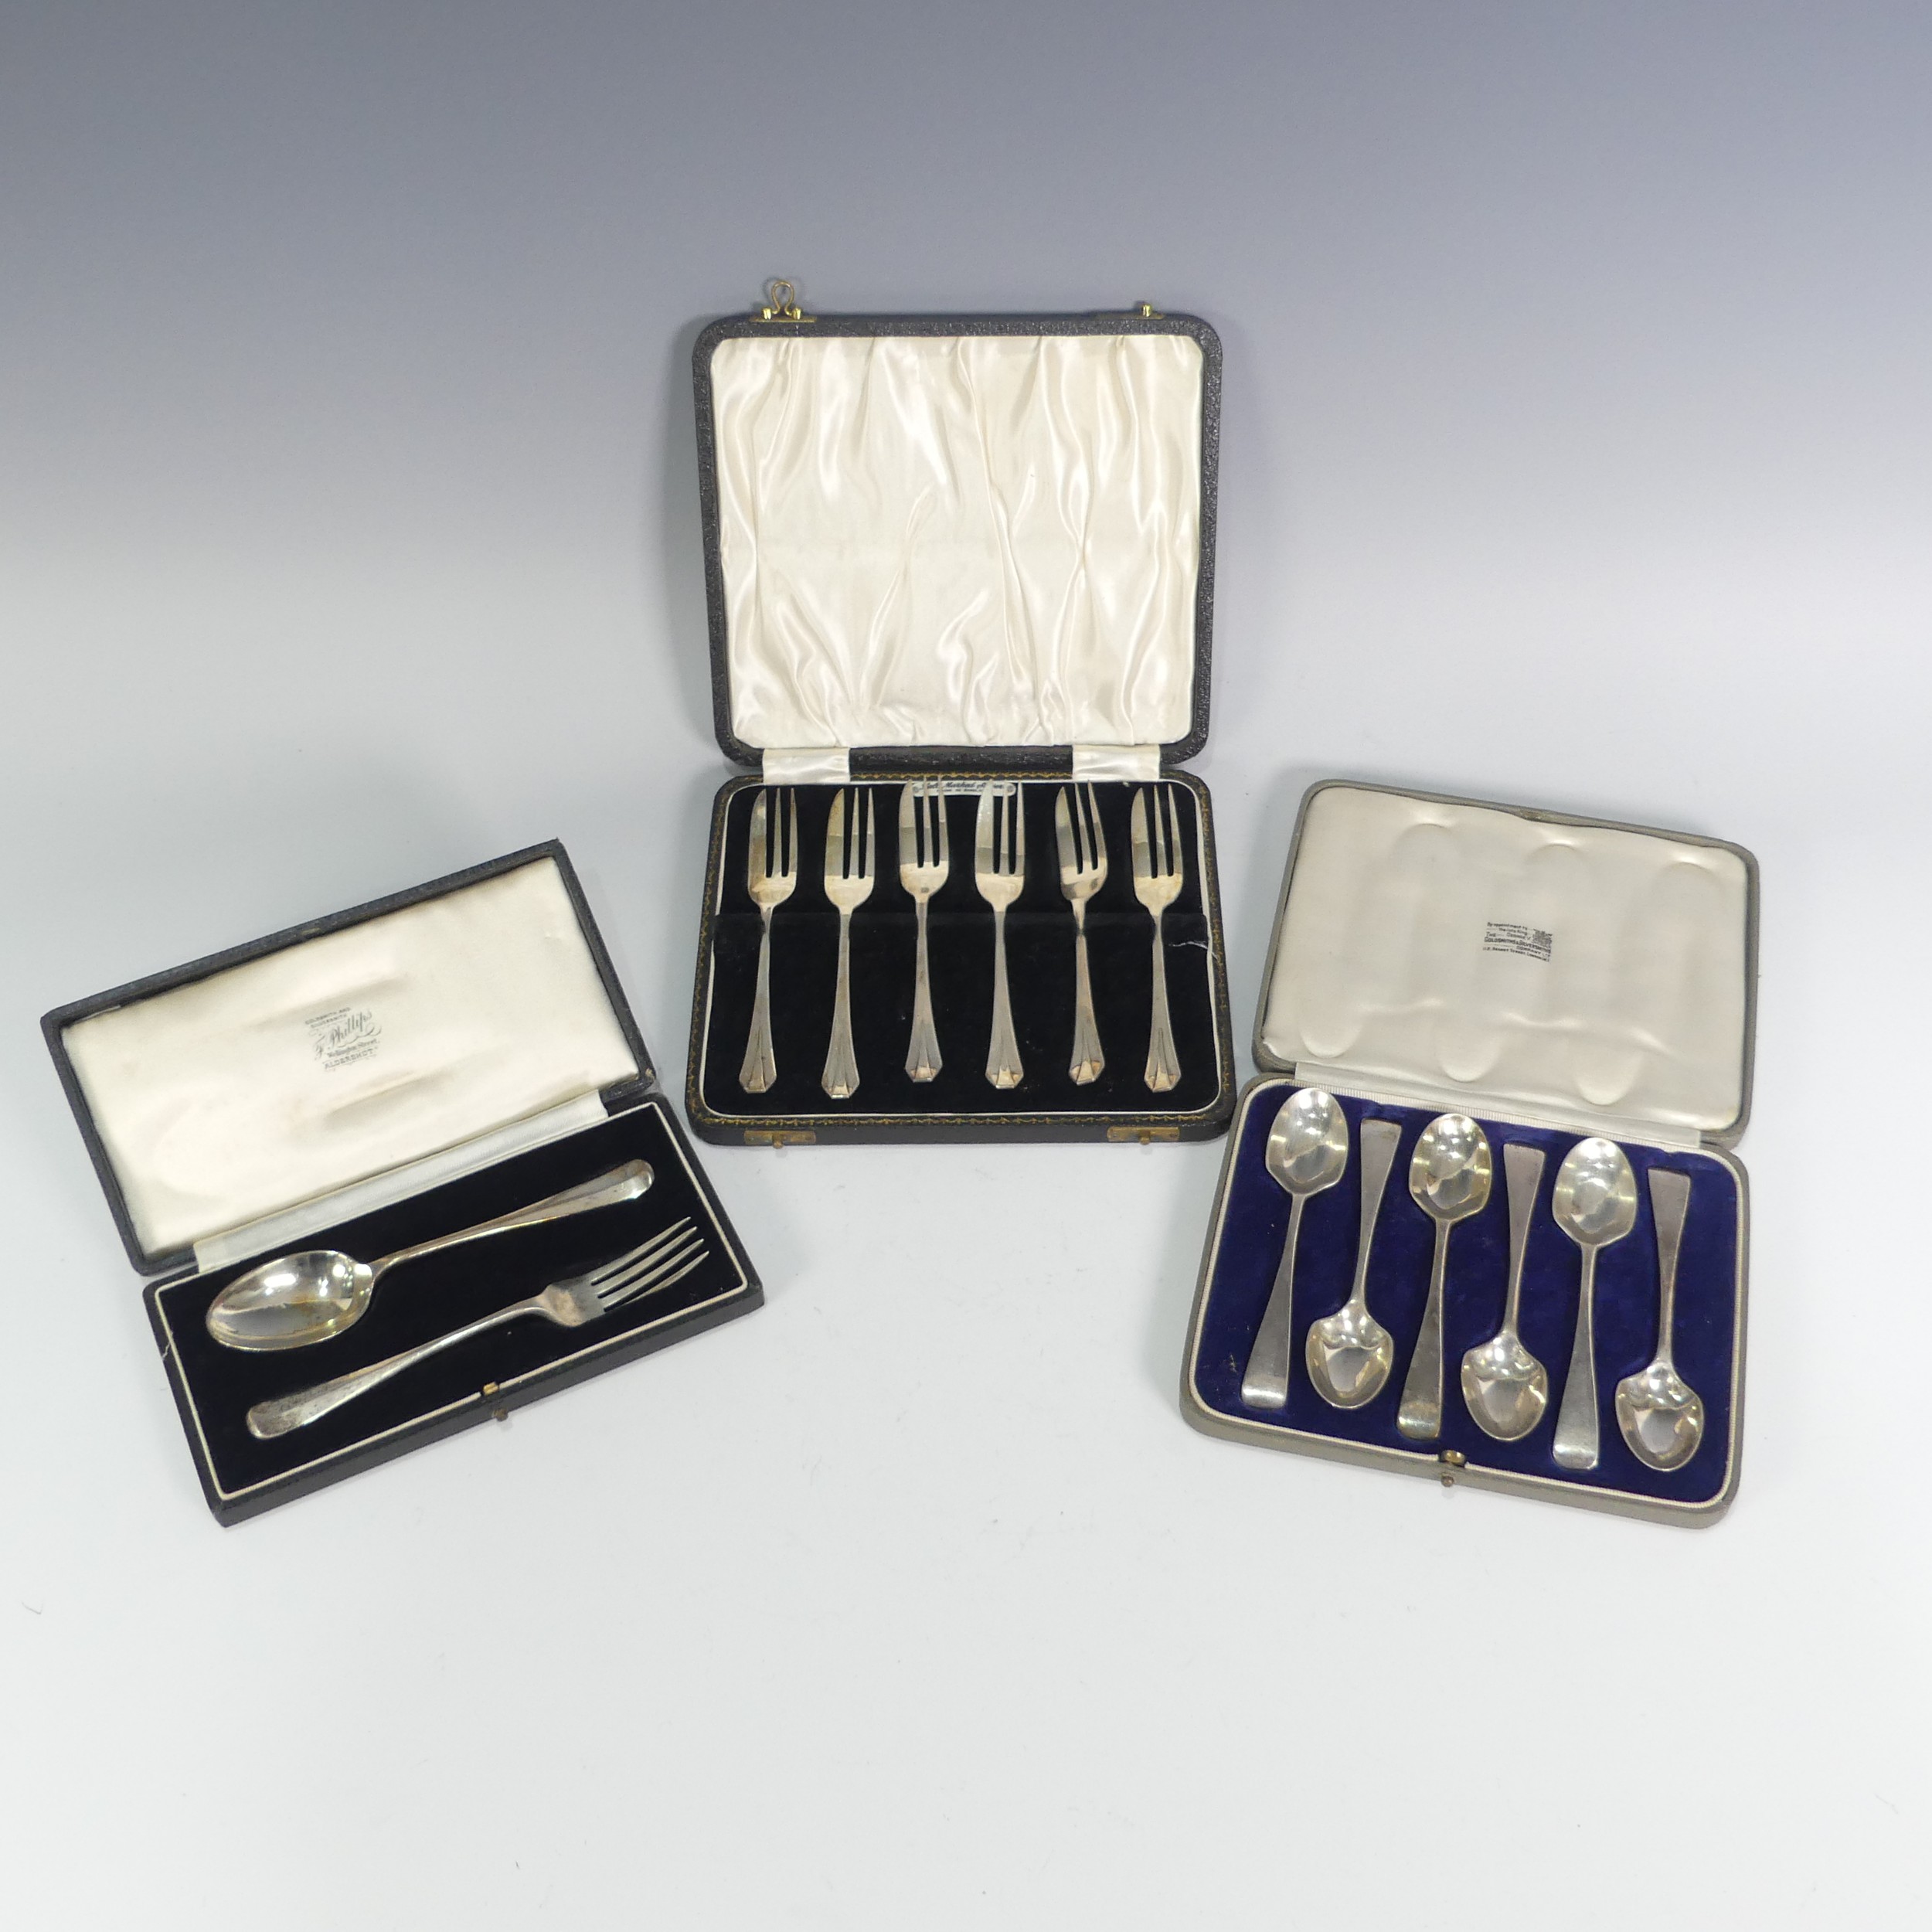 A cased set of six Edwardian silver Egg Spoons, by Josiah Williams & Co., hallmarked London, 1903,